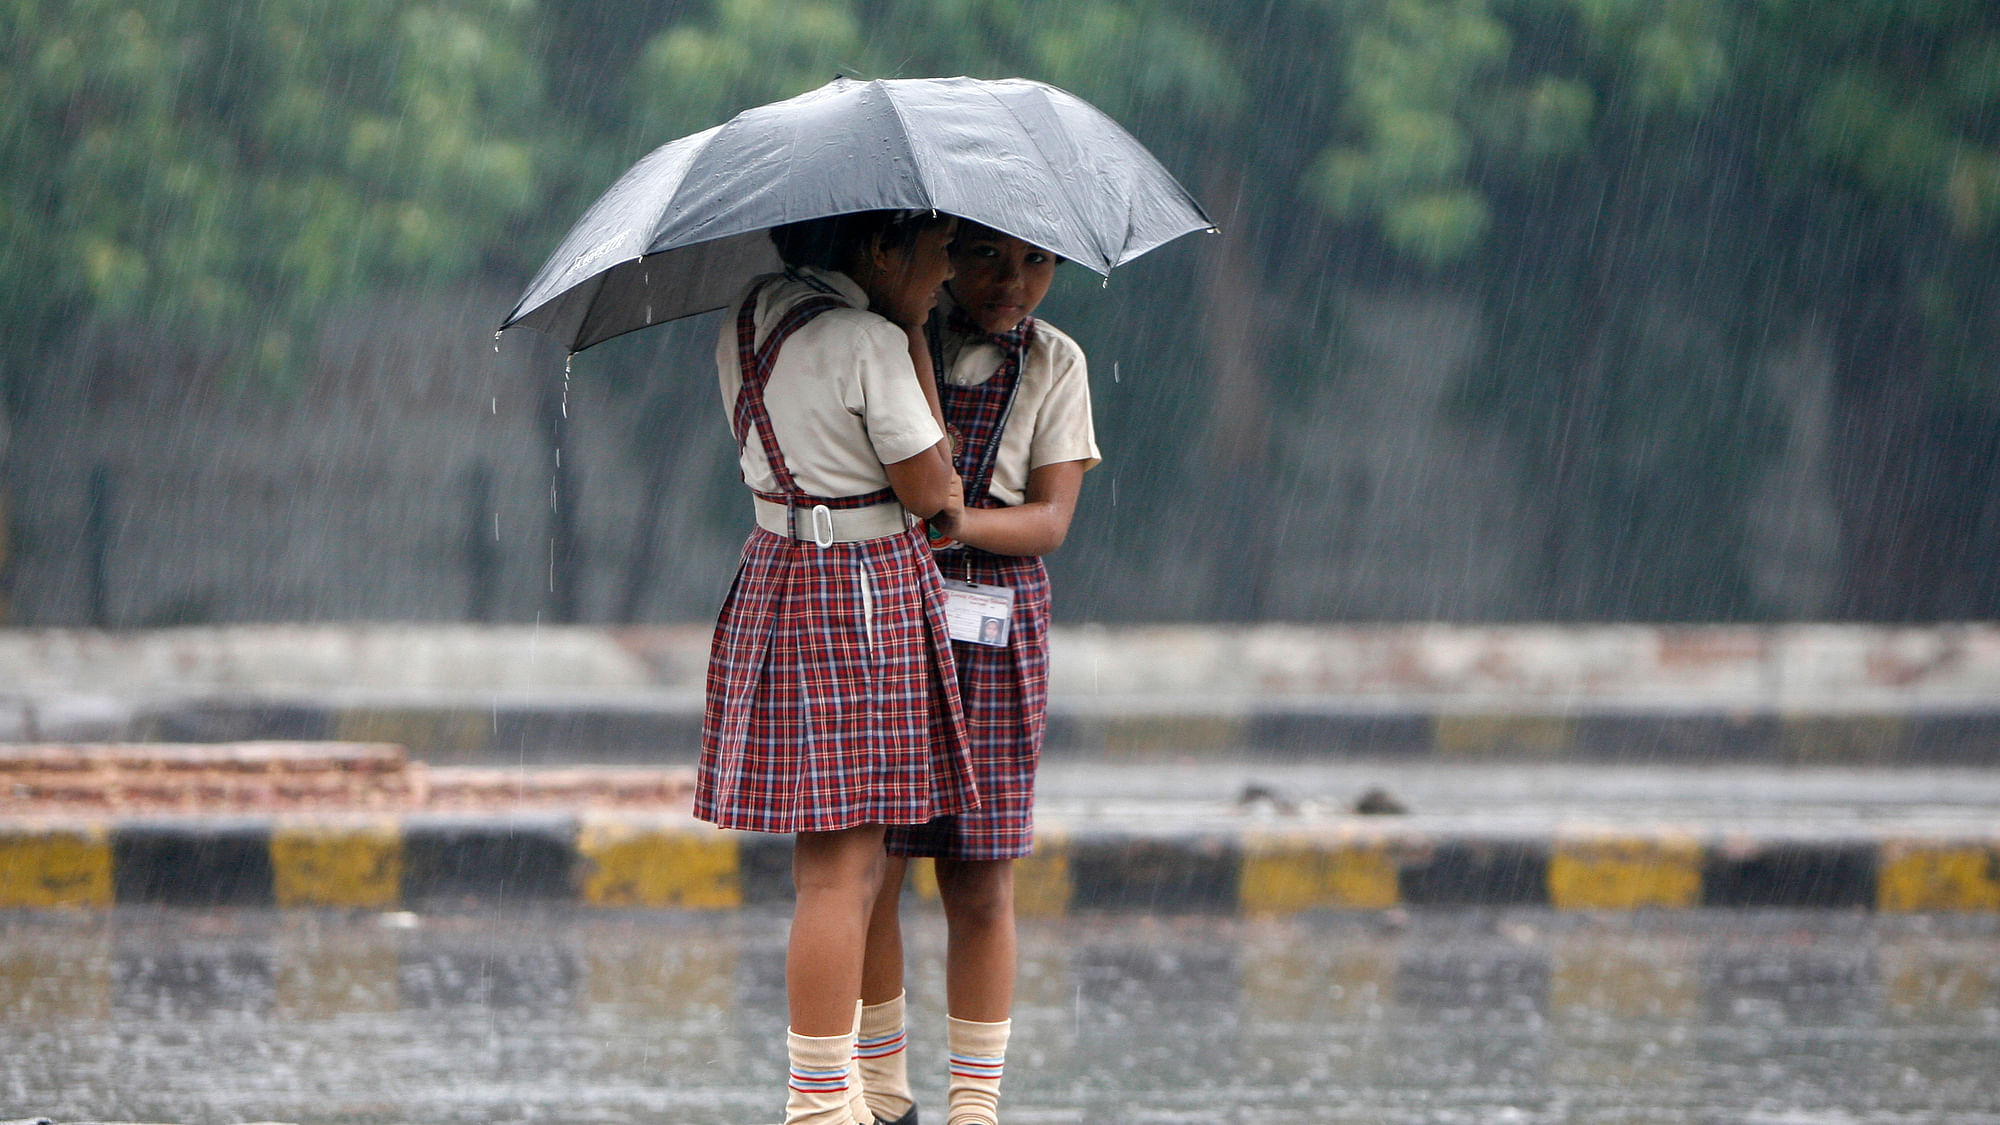 Rainfall will be 96 percent of the long-period average, the Met department has said. (Photo: Reuters)